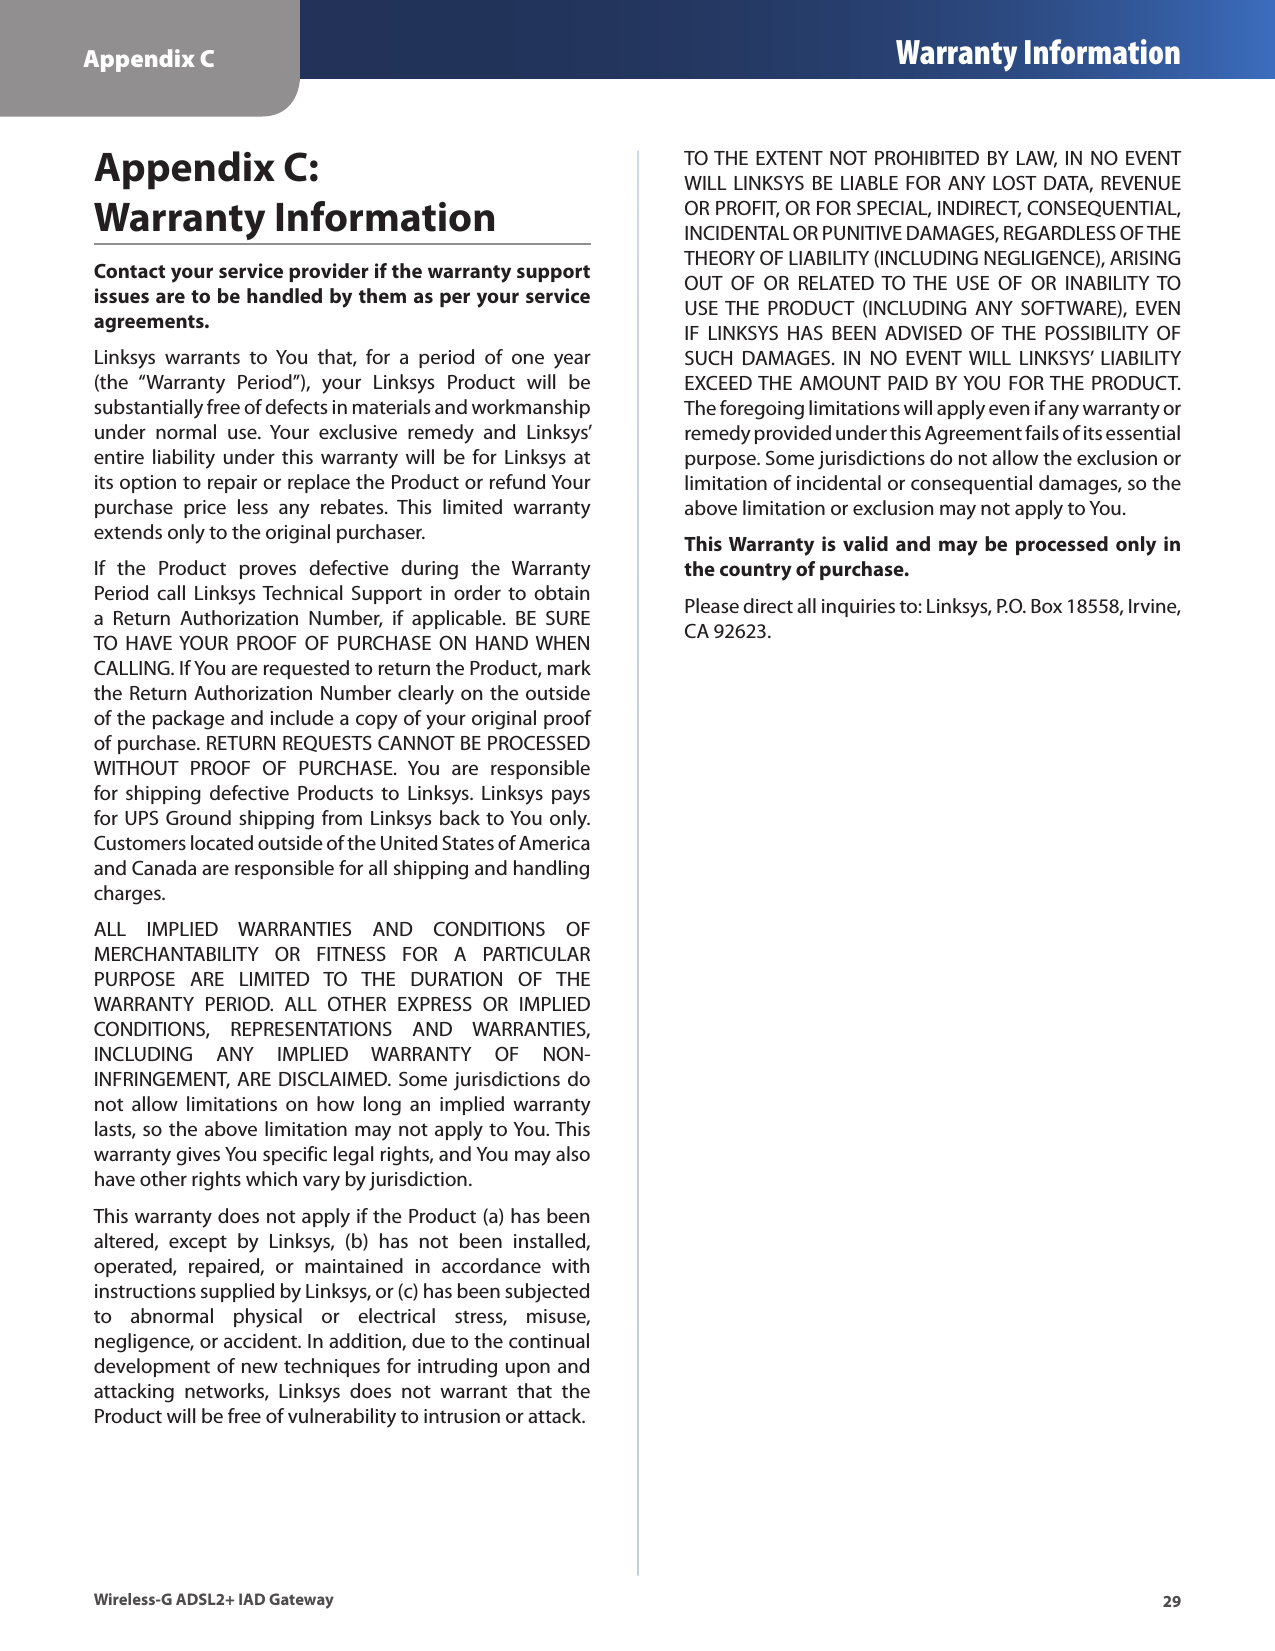 Appendix C Warranty Information29Wireless-G ADSL2+ IAD GatewayContact your service provider if the warranty support issues are to be handled by them as per your service agreements.Linksys  warrants  to  You  that,  for  a  period  of  one  year (the  “Warranty  Period”),  your  Linksys  Product  will  be substantially free of defects in materials and workmanship under  normal  use.  Your  exclusive  remedy  and  Linksys’ entire liability  under  this  warranty  will  be  for  Linksys  at its option to repair or replace the Product or refund Your purchase  price  less  any  rebates.  This  limited  warranty extends only to the original purchaser. If  the  Product  proves  defective  during  the  Warranty Period call  Linksys Technical  Support  in  order  to  obtain a  Return  Authorization  Number,  if  applicable.  BE  SURE TO  HAVE YOUR  PROOF  OF  PURCHASE  ON  HAND WHEN CALLING. If You are requested to return the Product, mark the Return Authorization Number clearly on the outside of the package and include a copy of your original proof of purchase. RETURN REQUESTS CANNOT BE PROCESSED WITHOUT  PROOF  OF  PURCHASE.  You  are  responsible for  shipping  defective  Products  to  Linksys.  Linksys  pays for UPS Ground shipping from Linksys back to You only. Customers located outside of the United States of America and Canada are responsible for all shipping and handling charges. ALL  IMPLIED  WARRANTIES  AND  CONDITIONS  OF MERCHANTABILITY  OR  FITNESS  FOR  A  PARTICULAR PURPOSE  ARE  LIMITED  TO  THE  DURATION  OF  THE WARRANTY  PERIOD.  ALL  OTHER  EXPRESS  OR  IMPLIED CONDITIONS,  REPRESENTATIONS  AND  WARRANTIES, INCLUDING  ANY  IMPLIED  WARRANTY  OF  NON-INFRINGEMENT,  ARE DISCLAIMED. Some jurisdictions do not  allow  limitations  on  how  long  an  implied  warranty lasts, so the above limitation may not apply to You. This warranty gives You specific legal rights, and You may also have other rights which vary by jurisdiction.This warranty does not apply if the Product (a) has been altered,  except  by  Linksys,  (b)  has  not  been  installed, operated,  repaired,  or  maintained  in  accordance  with instructions supplied by Linksys, or (c) has been subjected to  abnormal  physical  or  electrical  stress,  misuse, negligence, or accident. In addition, due to the continual development of new techniques for intruding upon and attacking  networks,  Linksys  does  not  warrant  that  the Product will be free of vulnerability to intrusion or attack.TO THE EXTENT NOT PROHIBITED BY LAW,  IN NO EVENT WILL LINKSYS BE LIABLE FOR ANY LOST DATA, REVENUE OR PROFIT, OR FOR SPECIAL, INDIRECT, CONSEQUENTIAL, INCIDENTAL OR PUNITIVE DAMAGES, REGARDLESS OF THE THEORY OF LIABILITY (INCLUDING NEGLIGENCE), ARISING OUT  OF  OR  RELATED  TO  THE  USE  OF  OR  INABILITY  TO USE THE  PRODUCT  (INCLUDING  ANY  SOFTWARE),  EVEN IF  LINKSYS  HAS  BEEN  ADVISED  OF  THE  POSSIBILITY  OF SUCH  DAMAGES.  IN  NO  EVENT WILL  LINKSYS’  LIABILITY EXCEED THE AMOUNT PAID BY YOU  FOR THE PRODUCT. The foregoing limitations will apply even if any warranty or remedy provided under this Agreement fails of its essential purpose. Some jurisdictions do not allow the exclusion or limitation of incidental or consequential damages, so the above limitation or exclusion may not apply to You.This Warranty is  valid  and  may be  processed only  in the country of purchase.Please direct all inquiries to: Linksys, P.O. Box 18558, Irvine, CA 92623.Appendix C:  Warranty Information